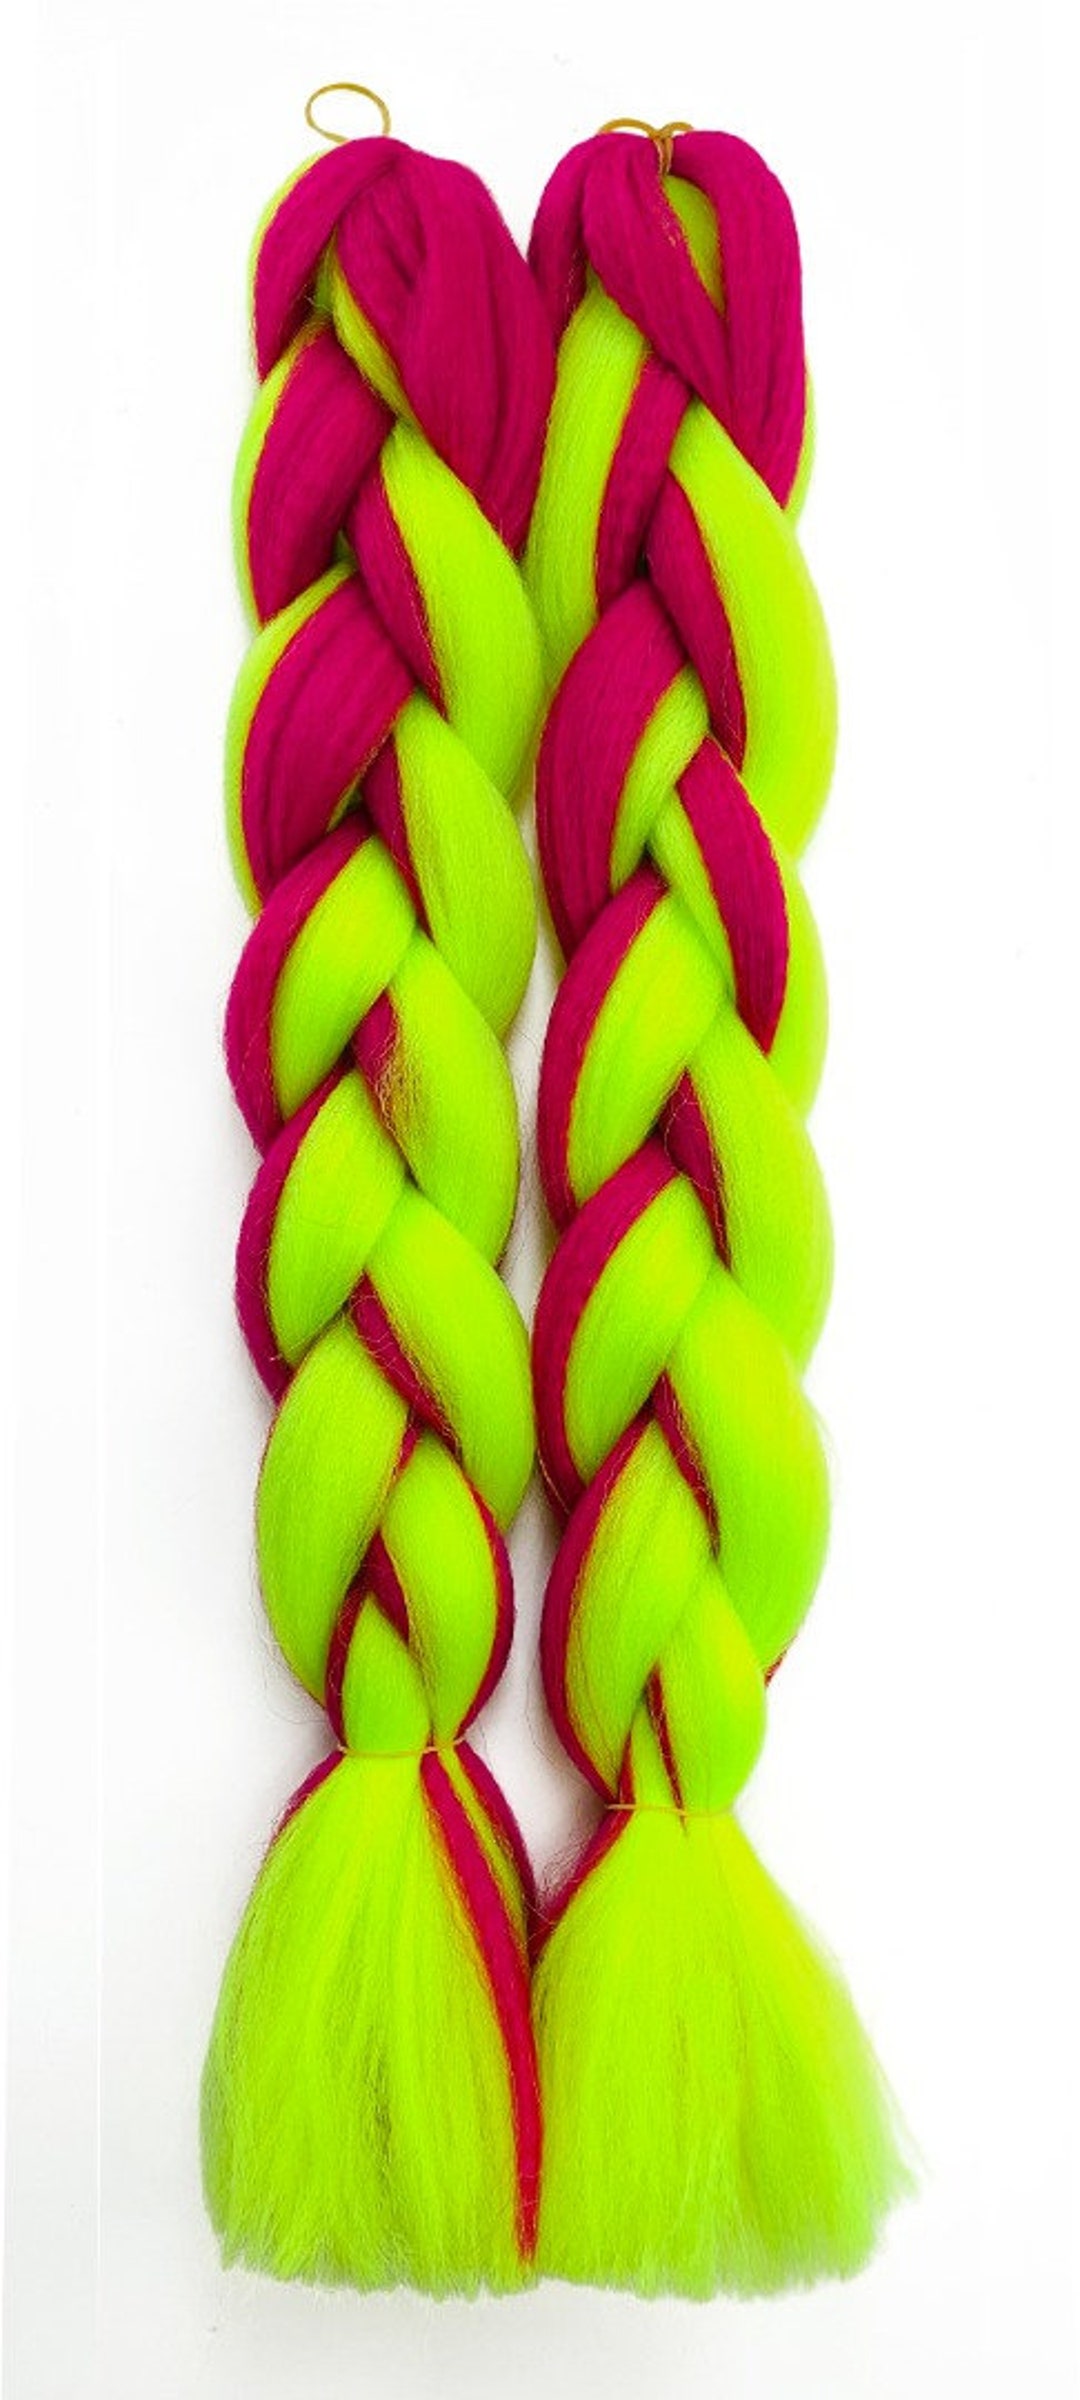 Lime Green & Pink Twist 24'' Jumbo Africa Braid Hair Extensions Offers You  Unlimited Curls and Styles That Are Just Right for You.extensions -   Finland